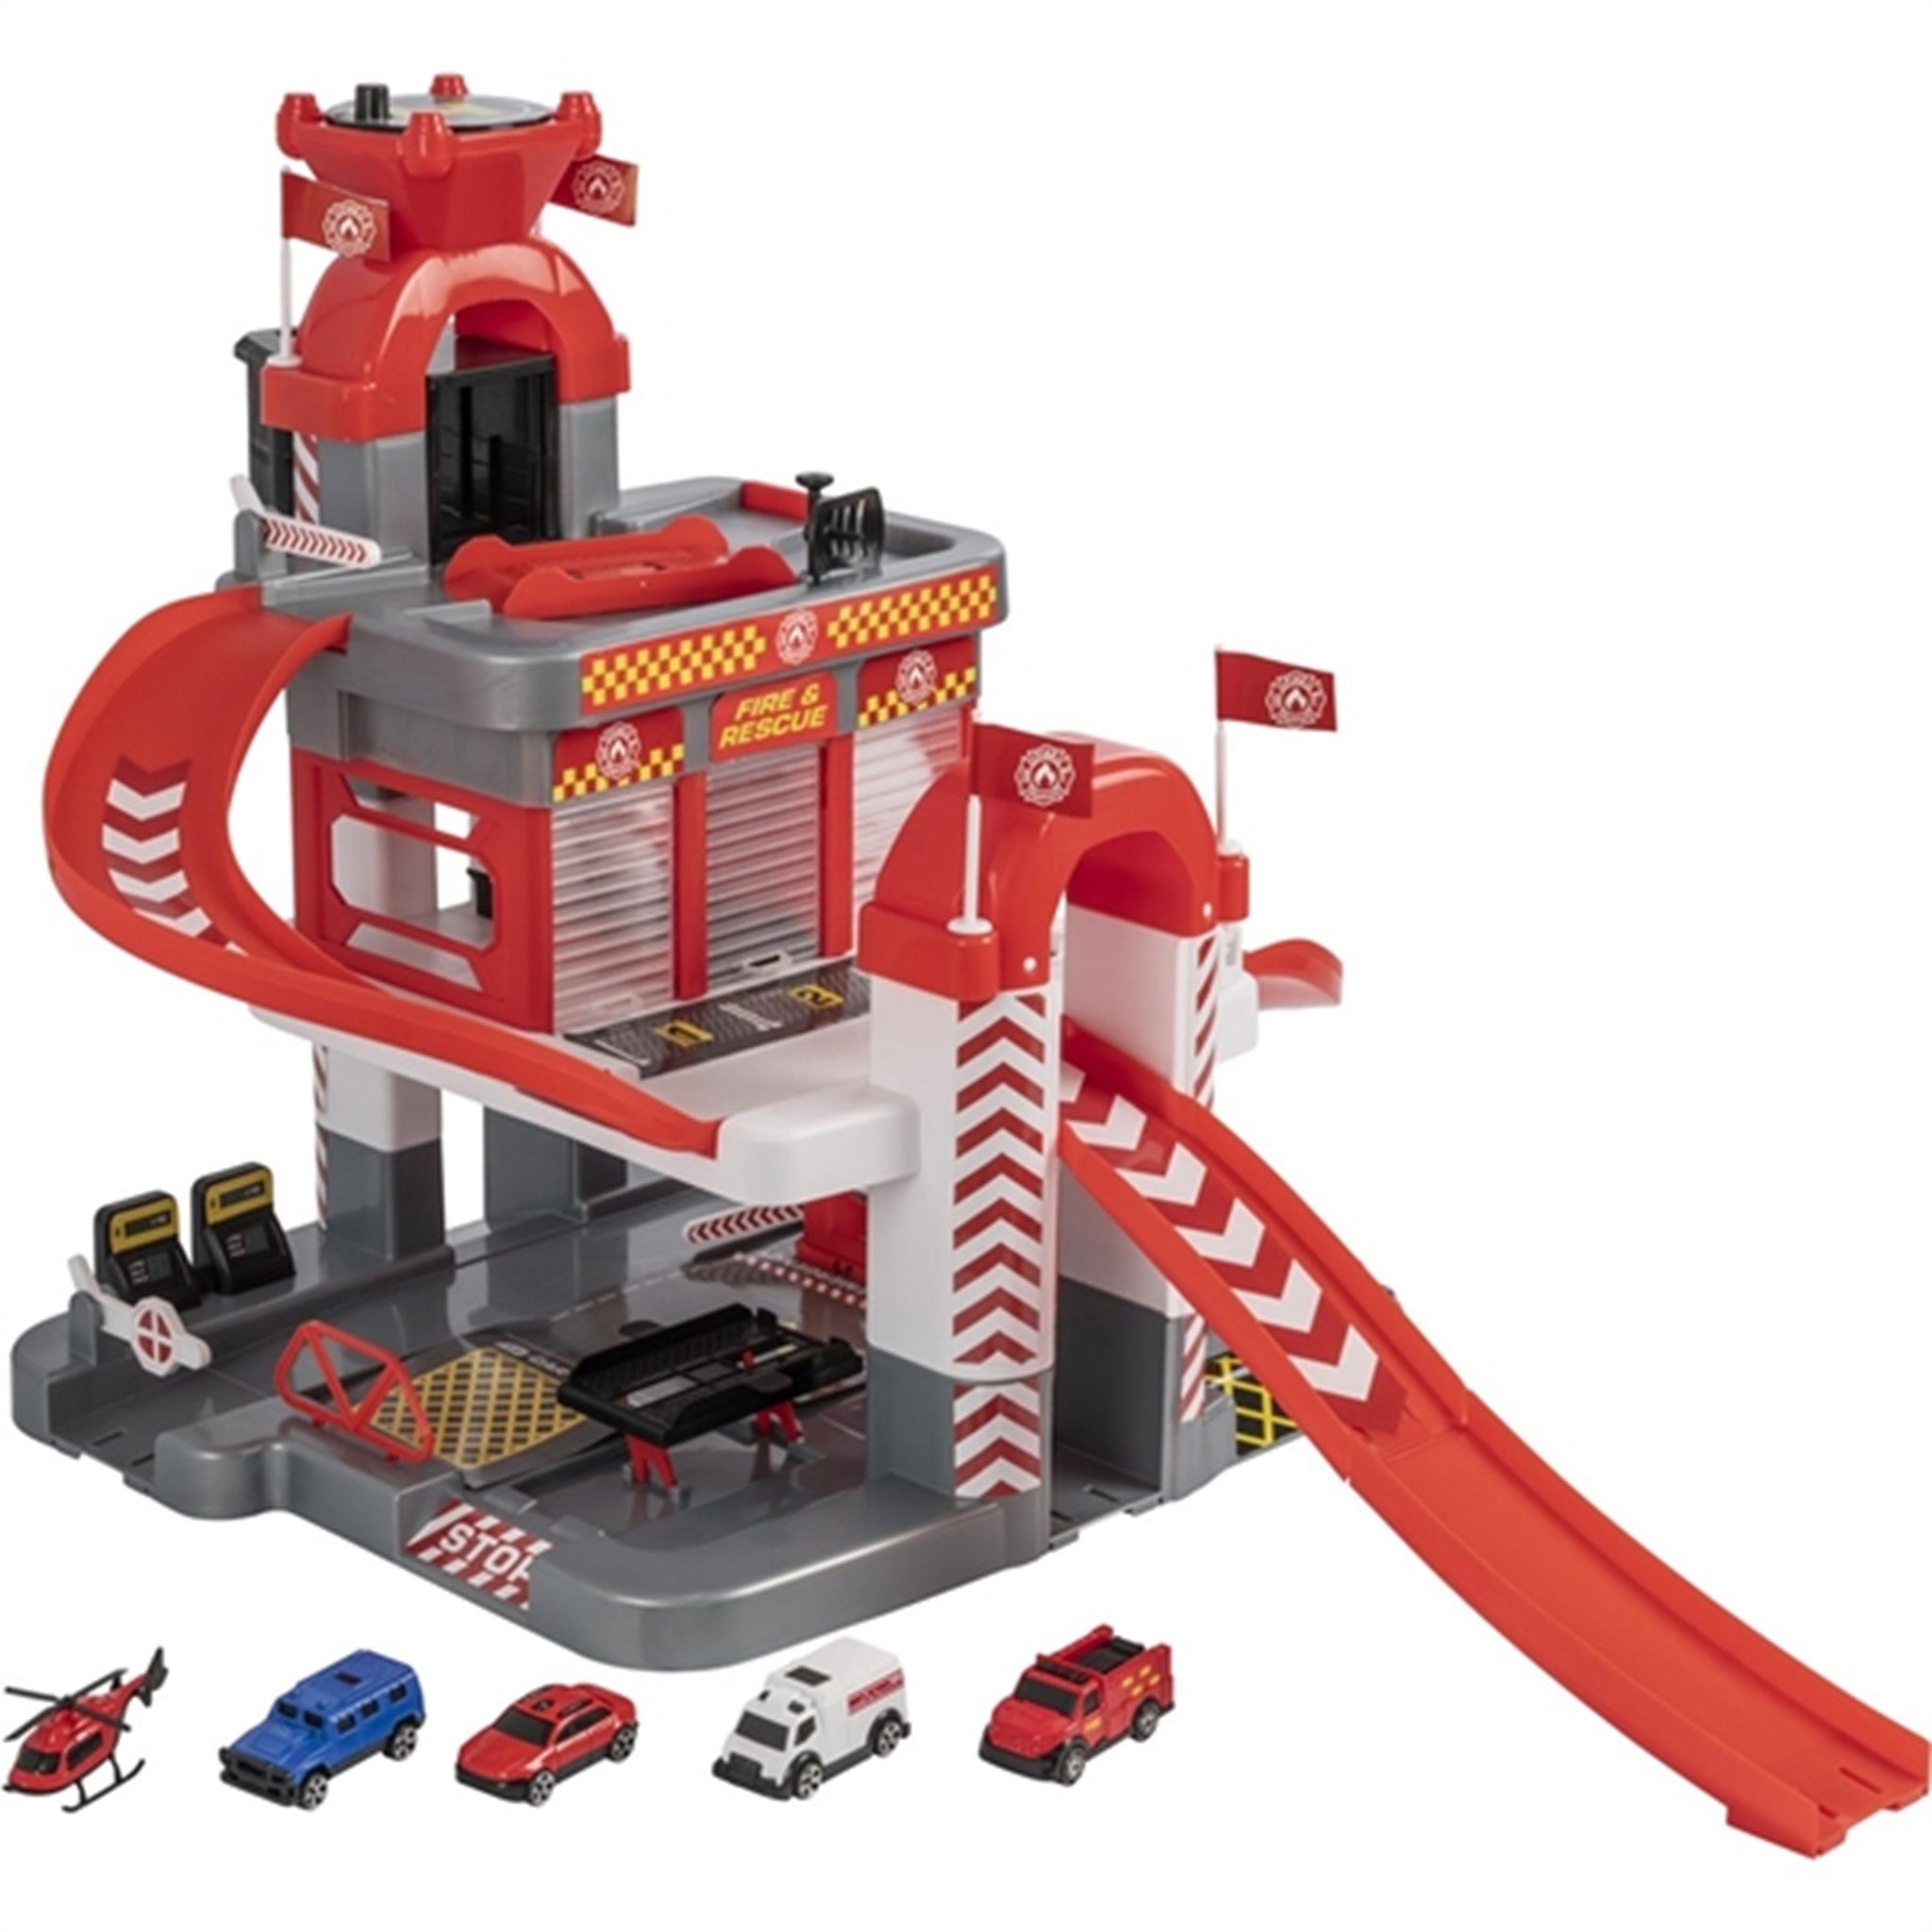 Teamsterz Fire Station with 5 Cars